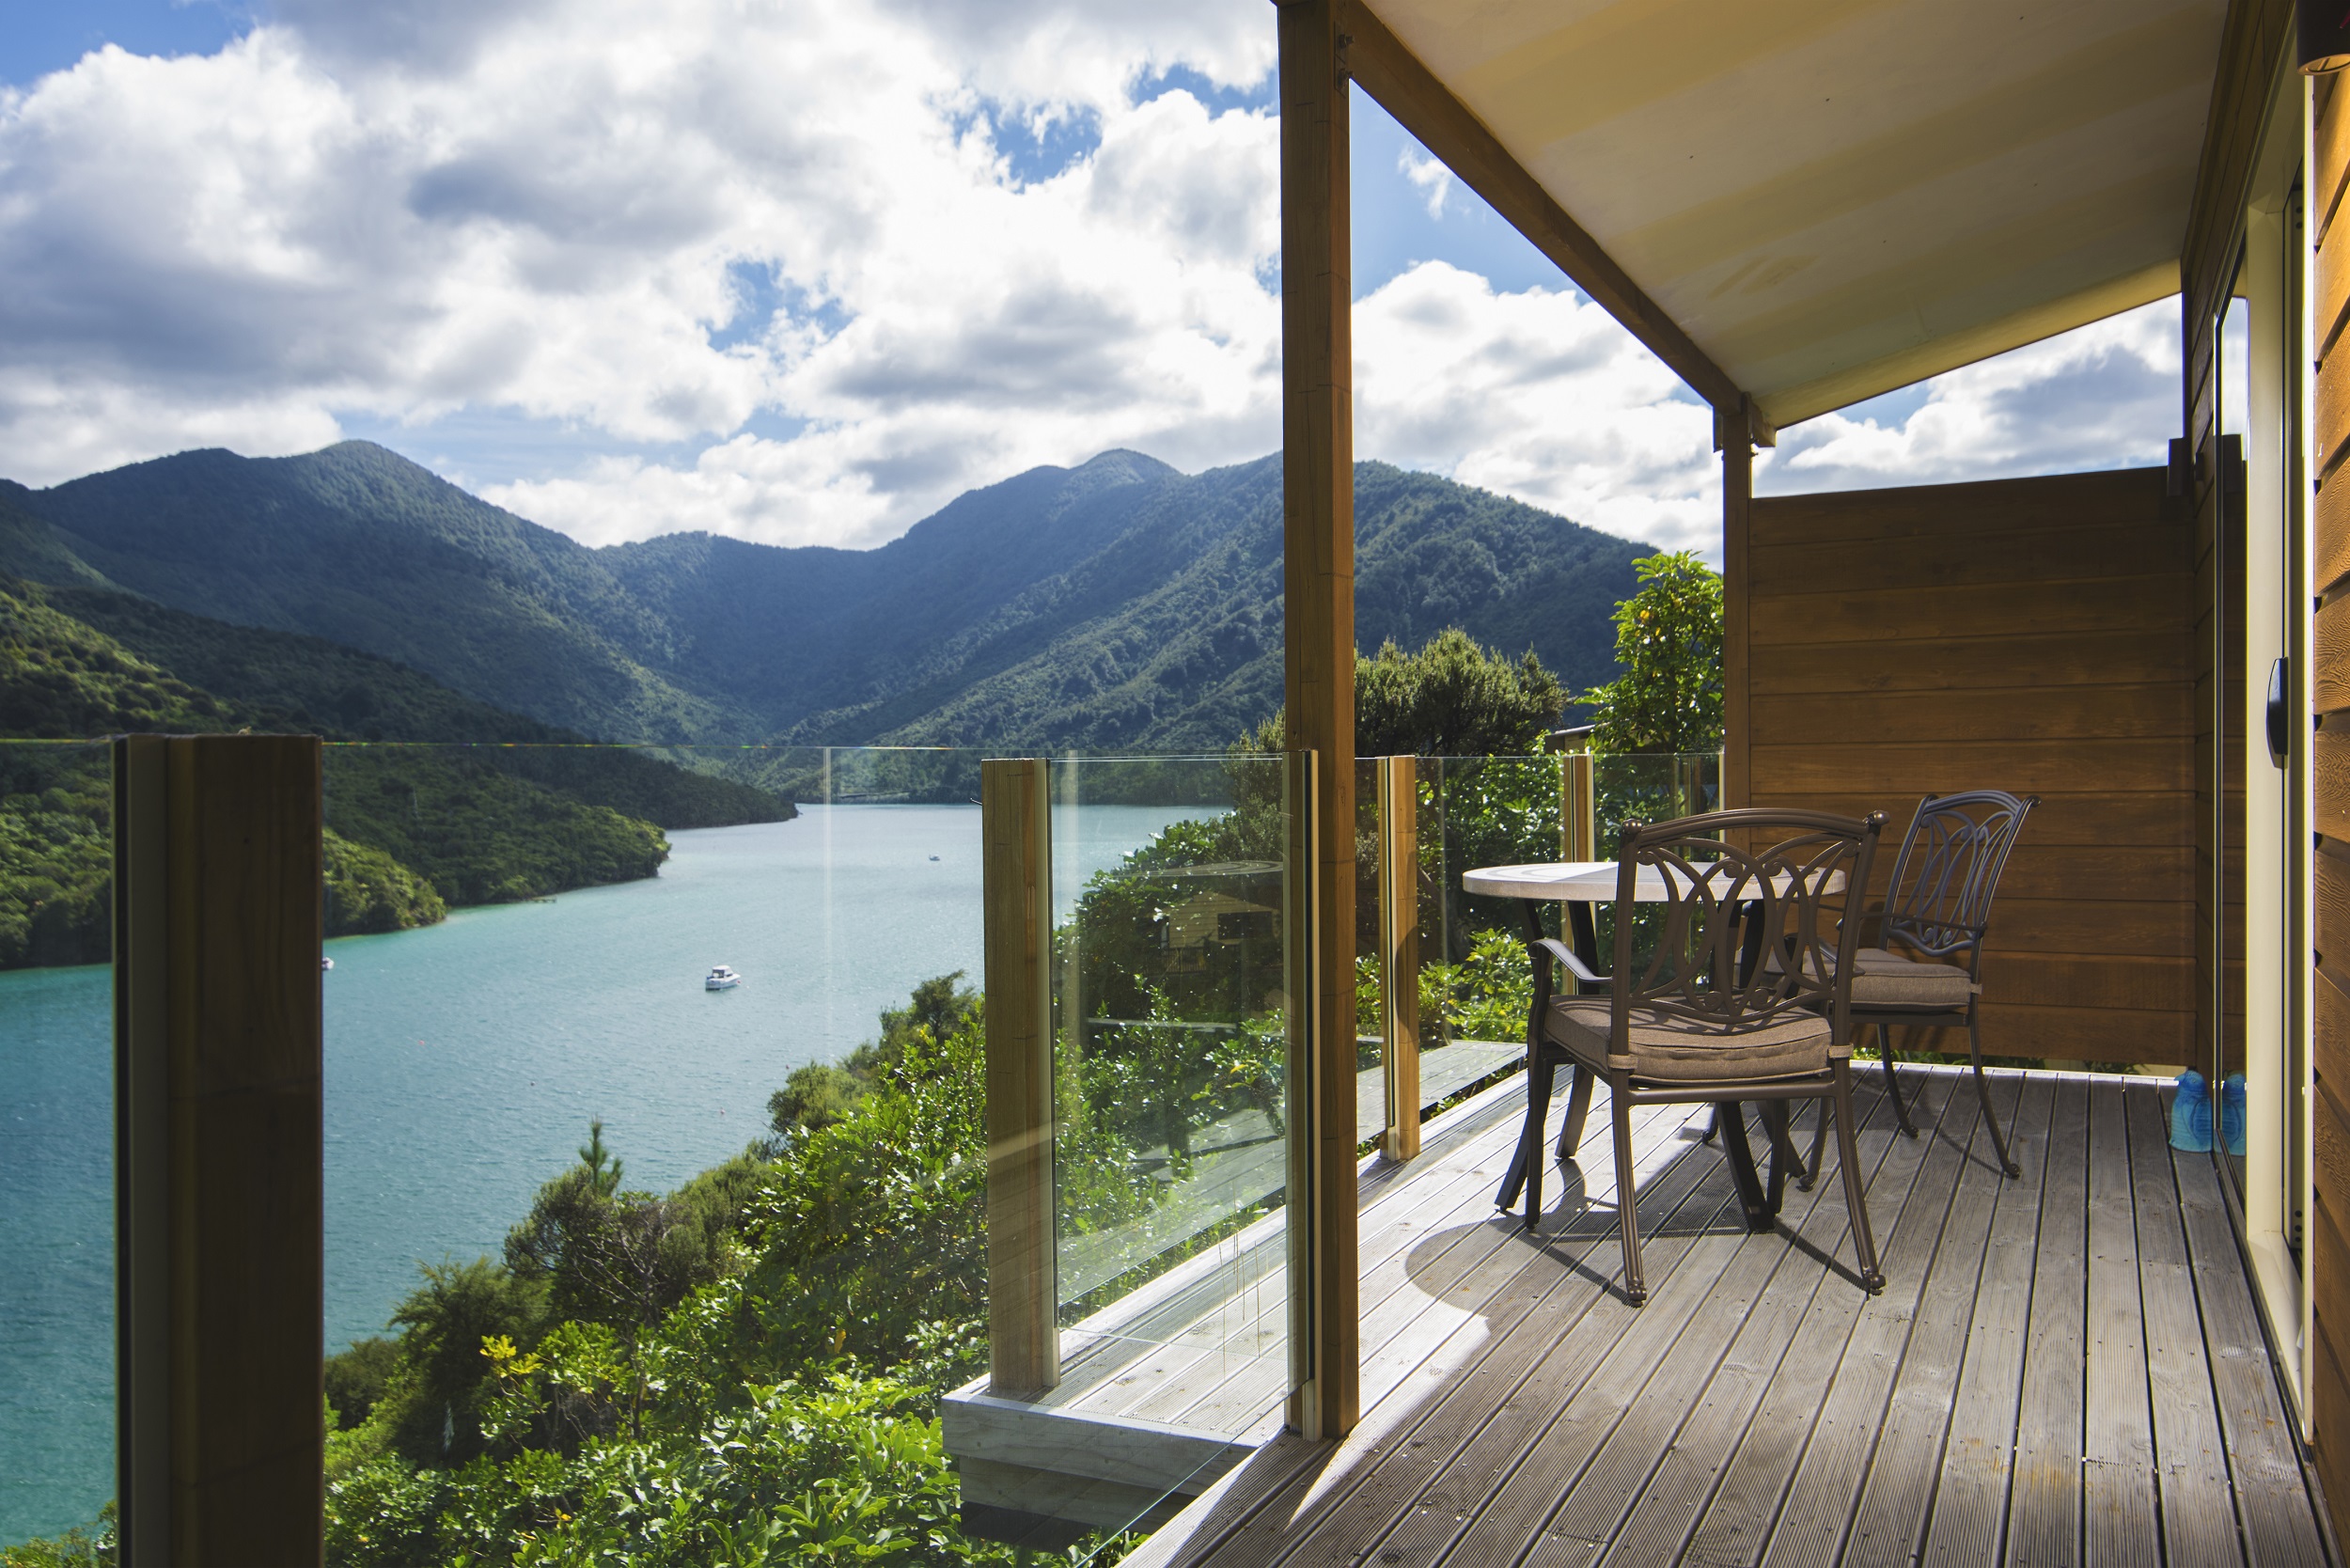 The private furnished balcony of a Frond Suite at Punga Cove has sweeping views across Endeavour Inlet in the Marlborough Sounds, New Zealand